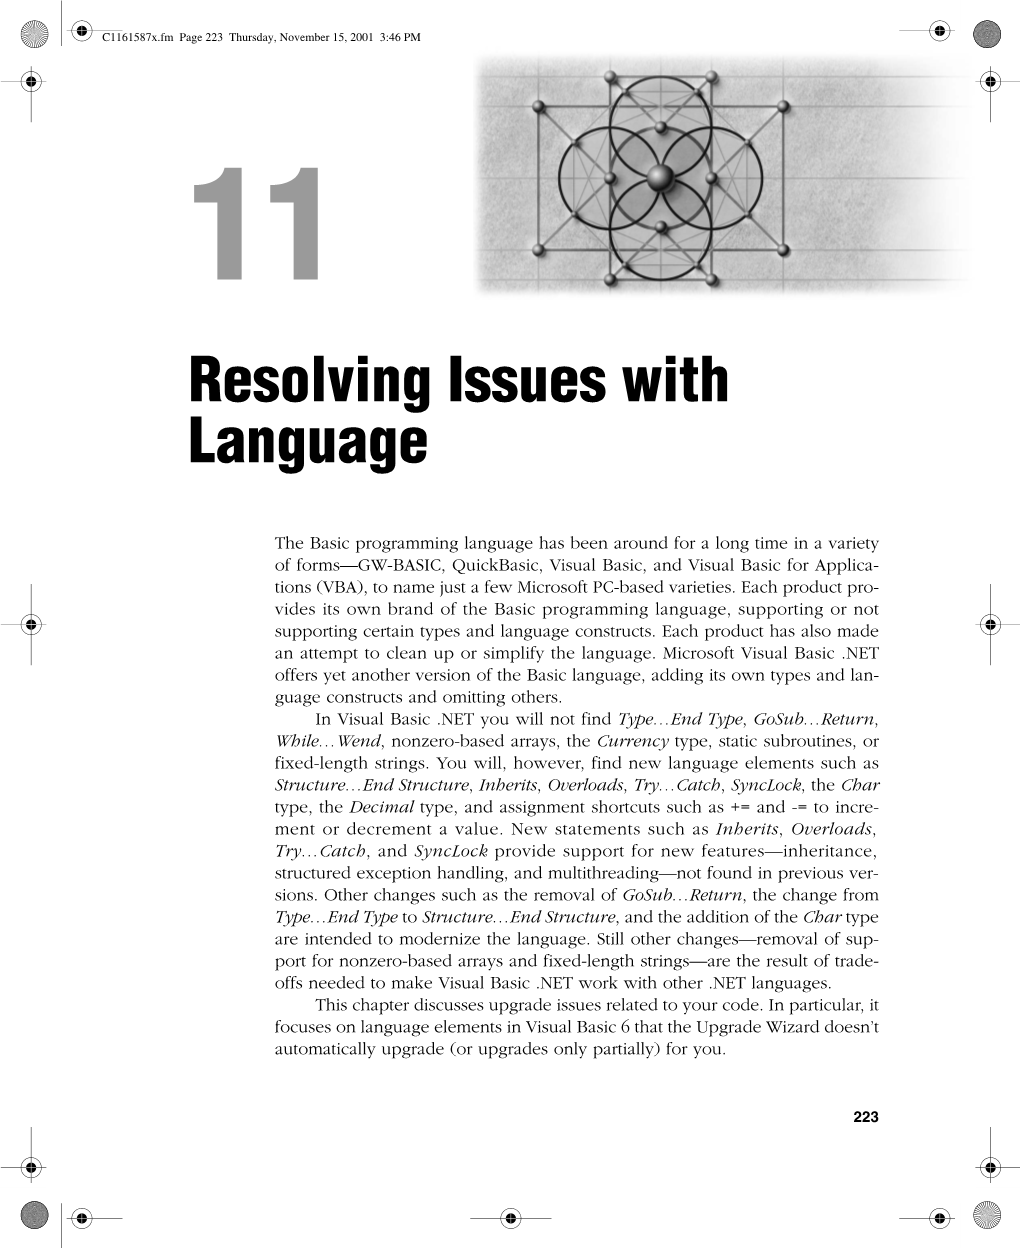 Resolving Issues with Language